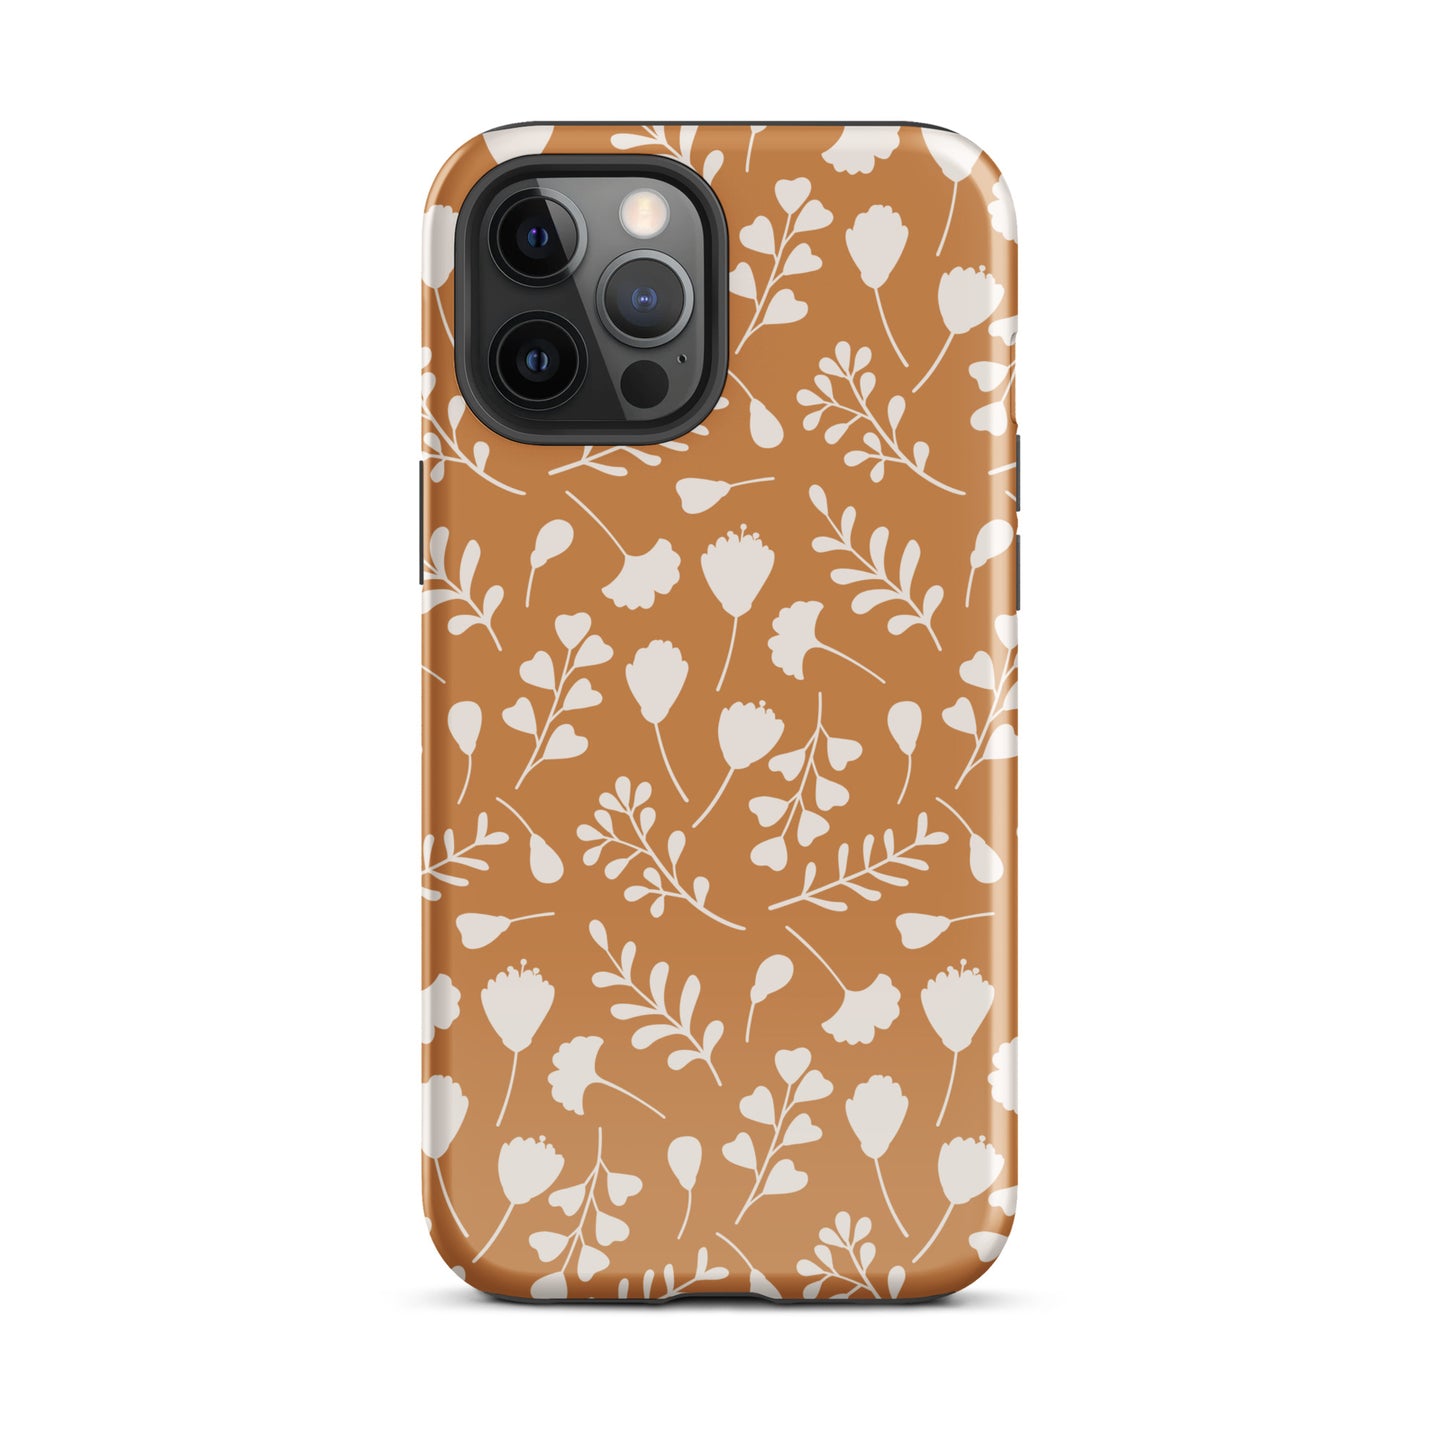 Autumn Bloom iPhone Case iPhone 12 Pro Max Glossy